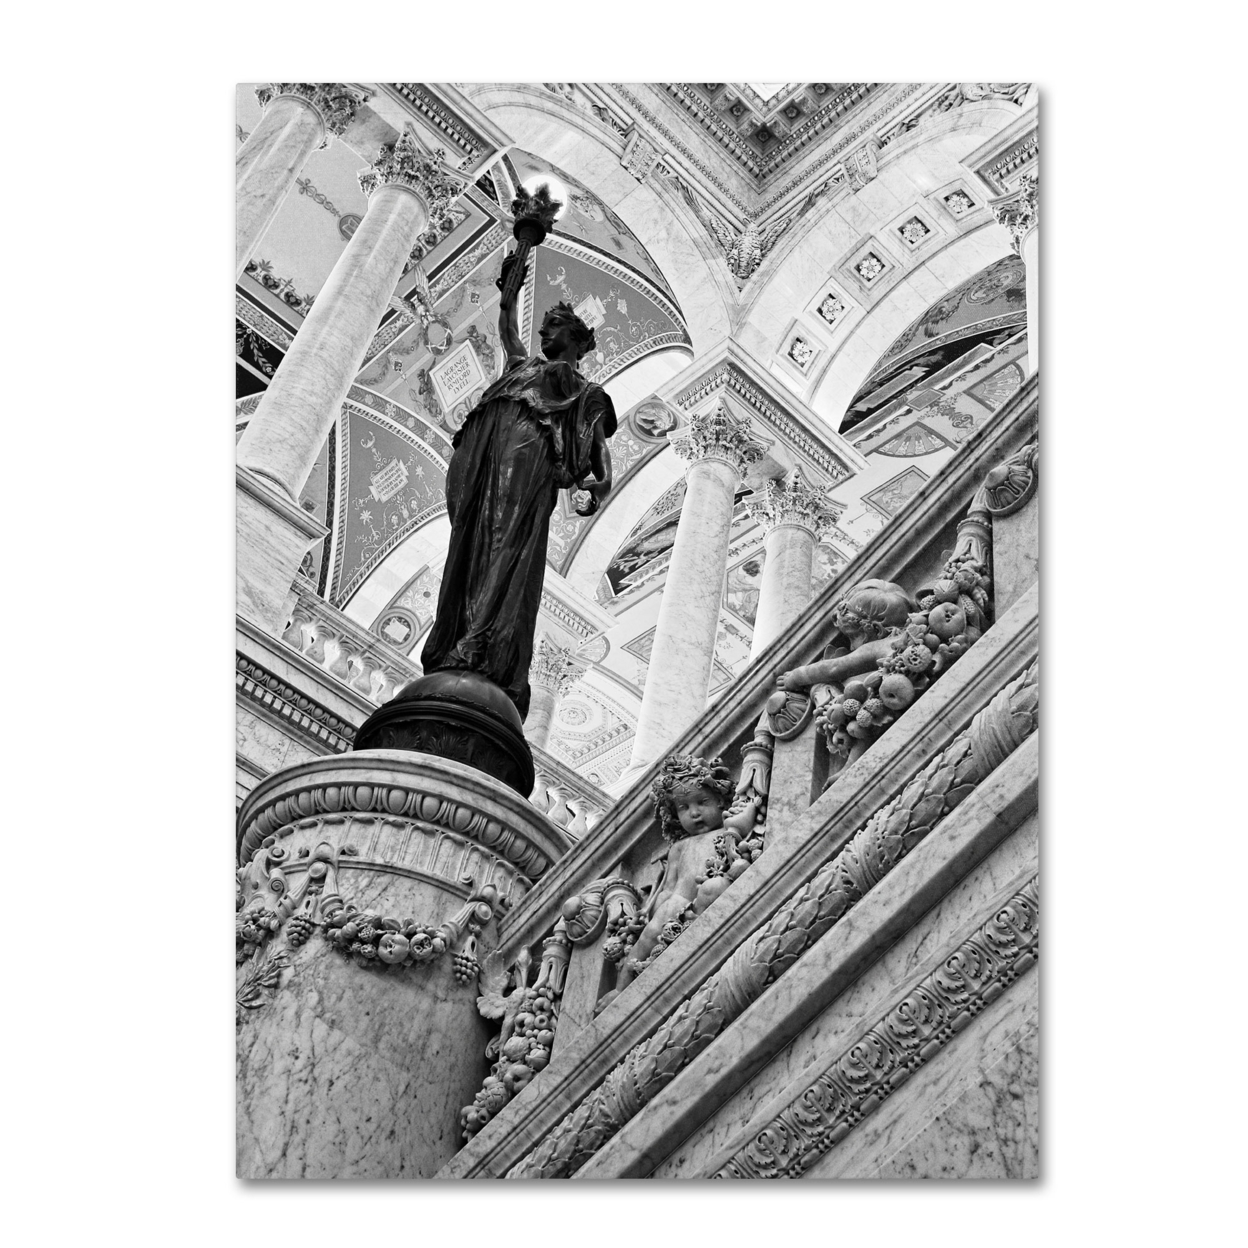 Gregory Ohanlon 'Library Of Congress- Great Hall' Canvas Wall Art 35 X 47